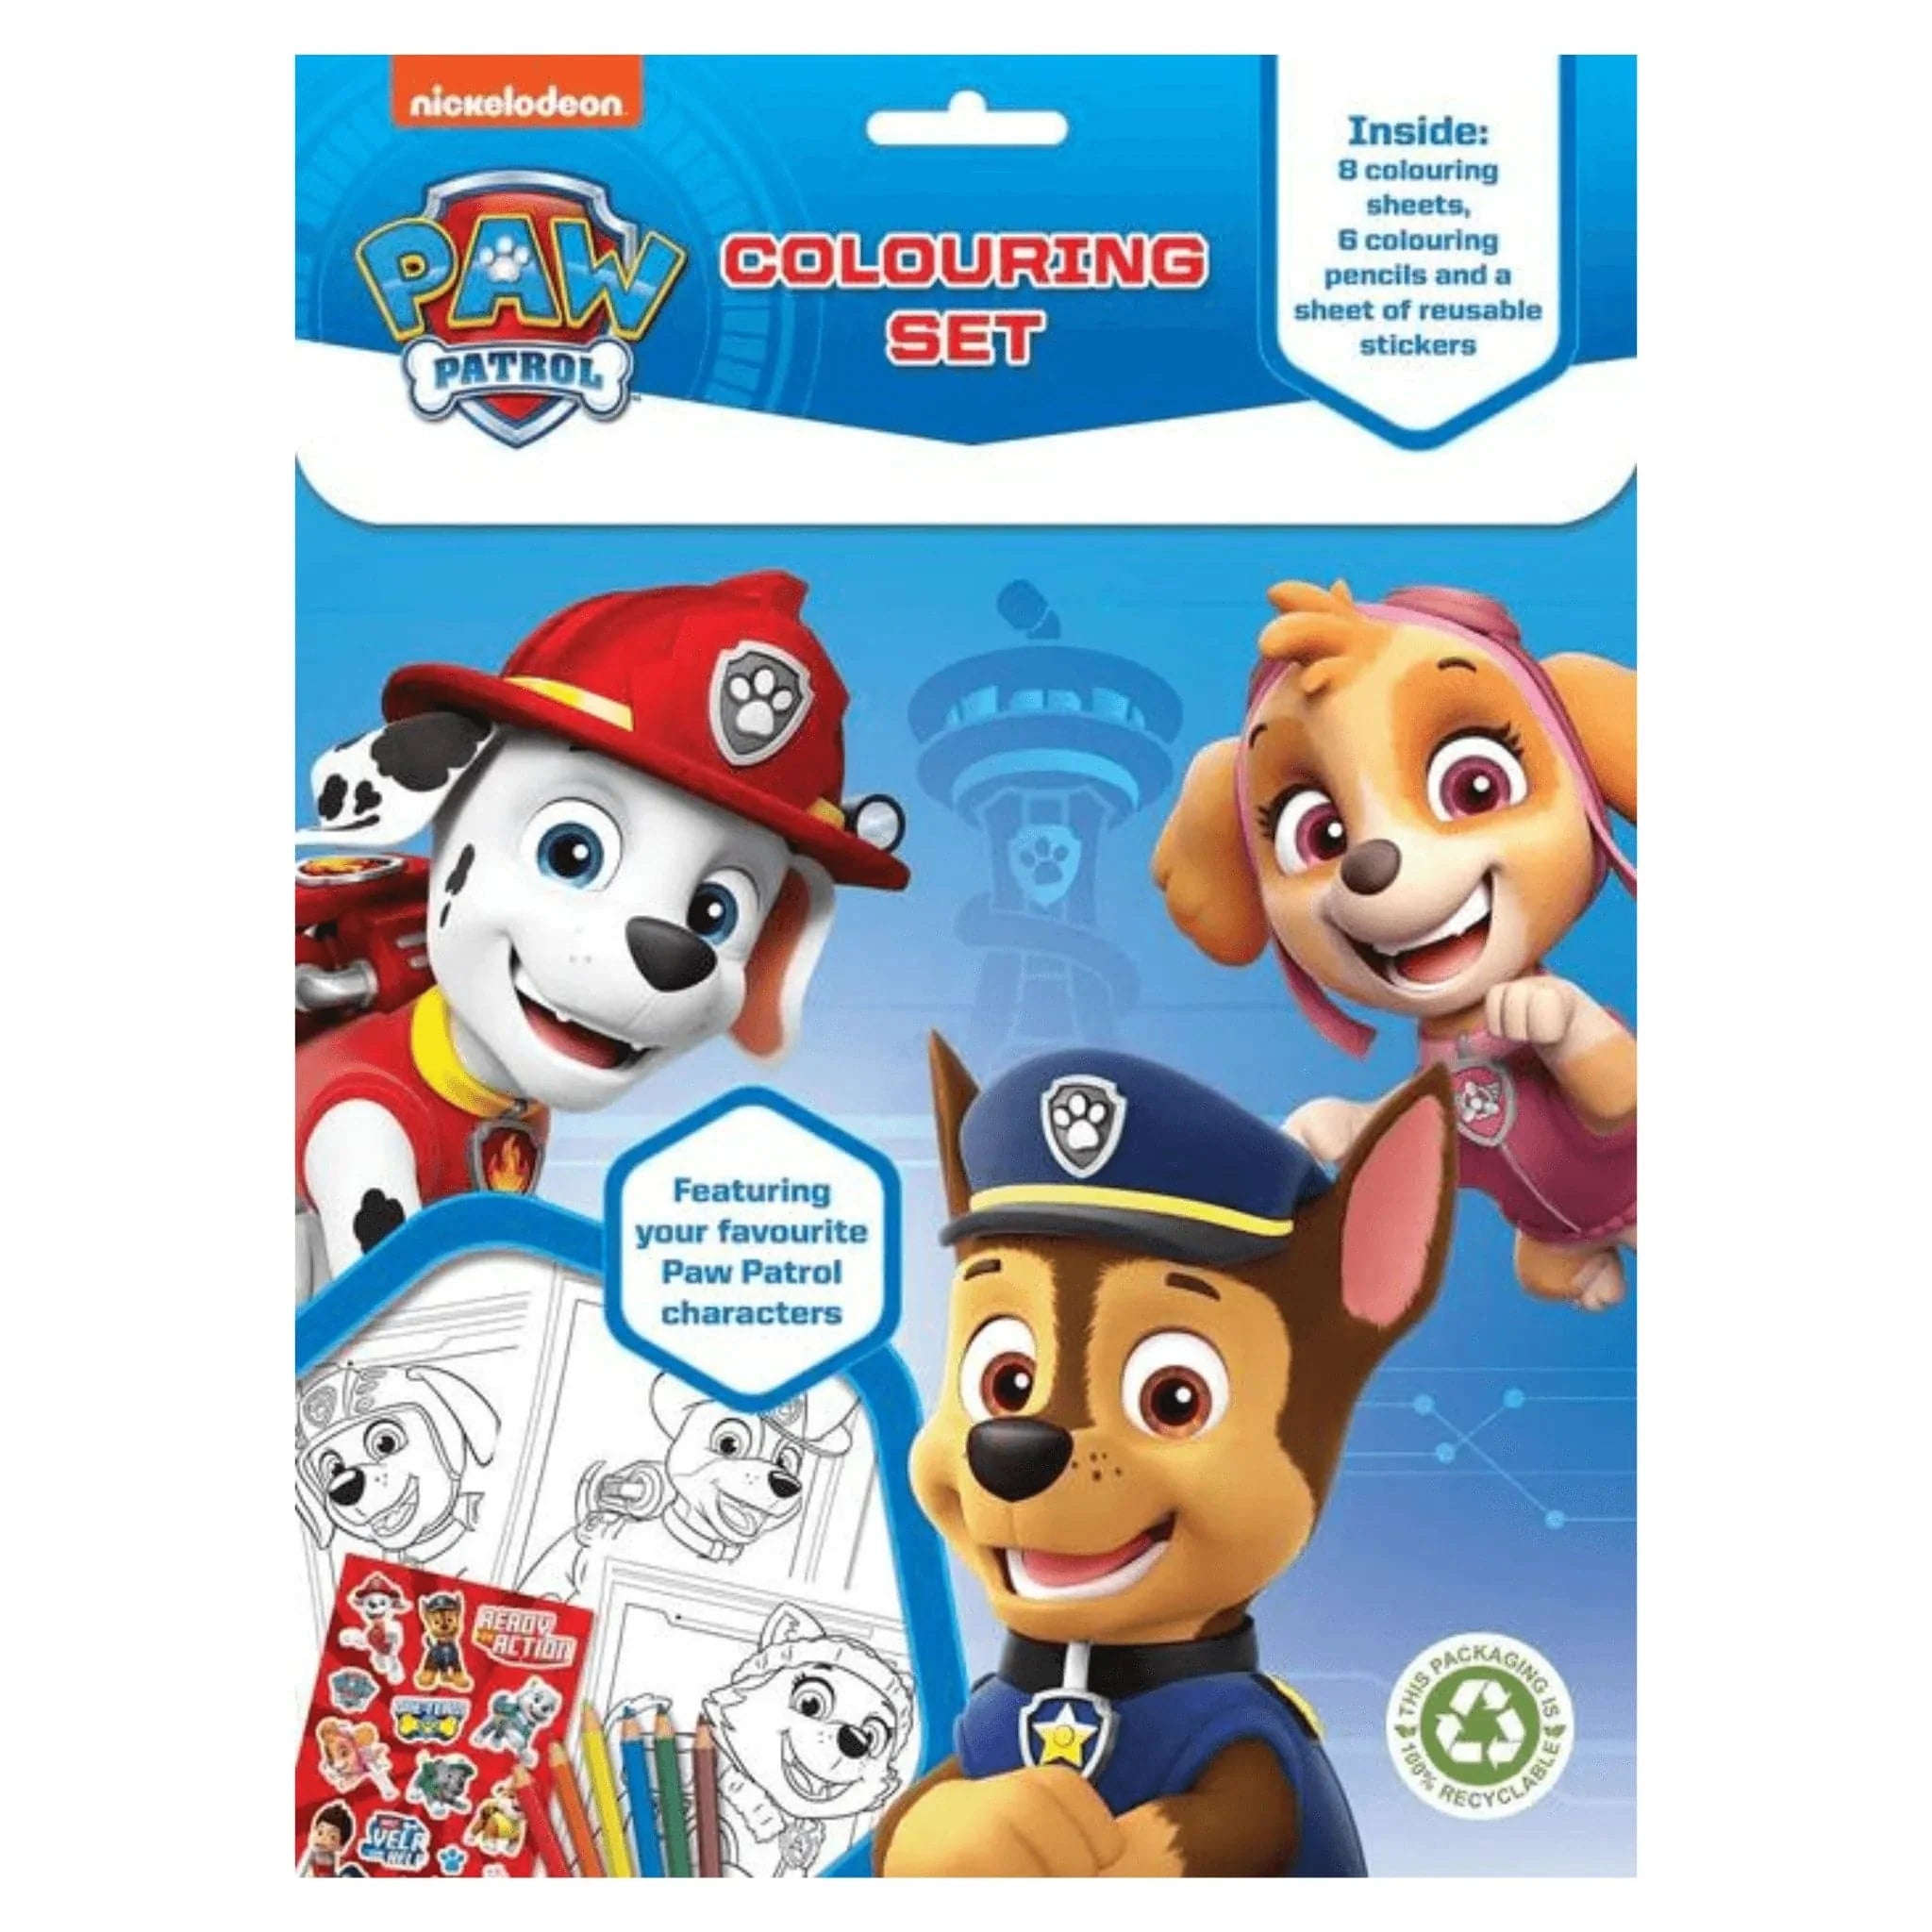 Paw Patrol Colouring Set - Kids Party Craft